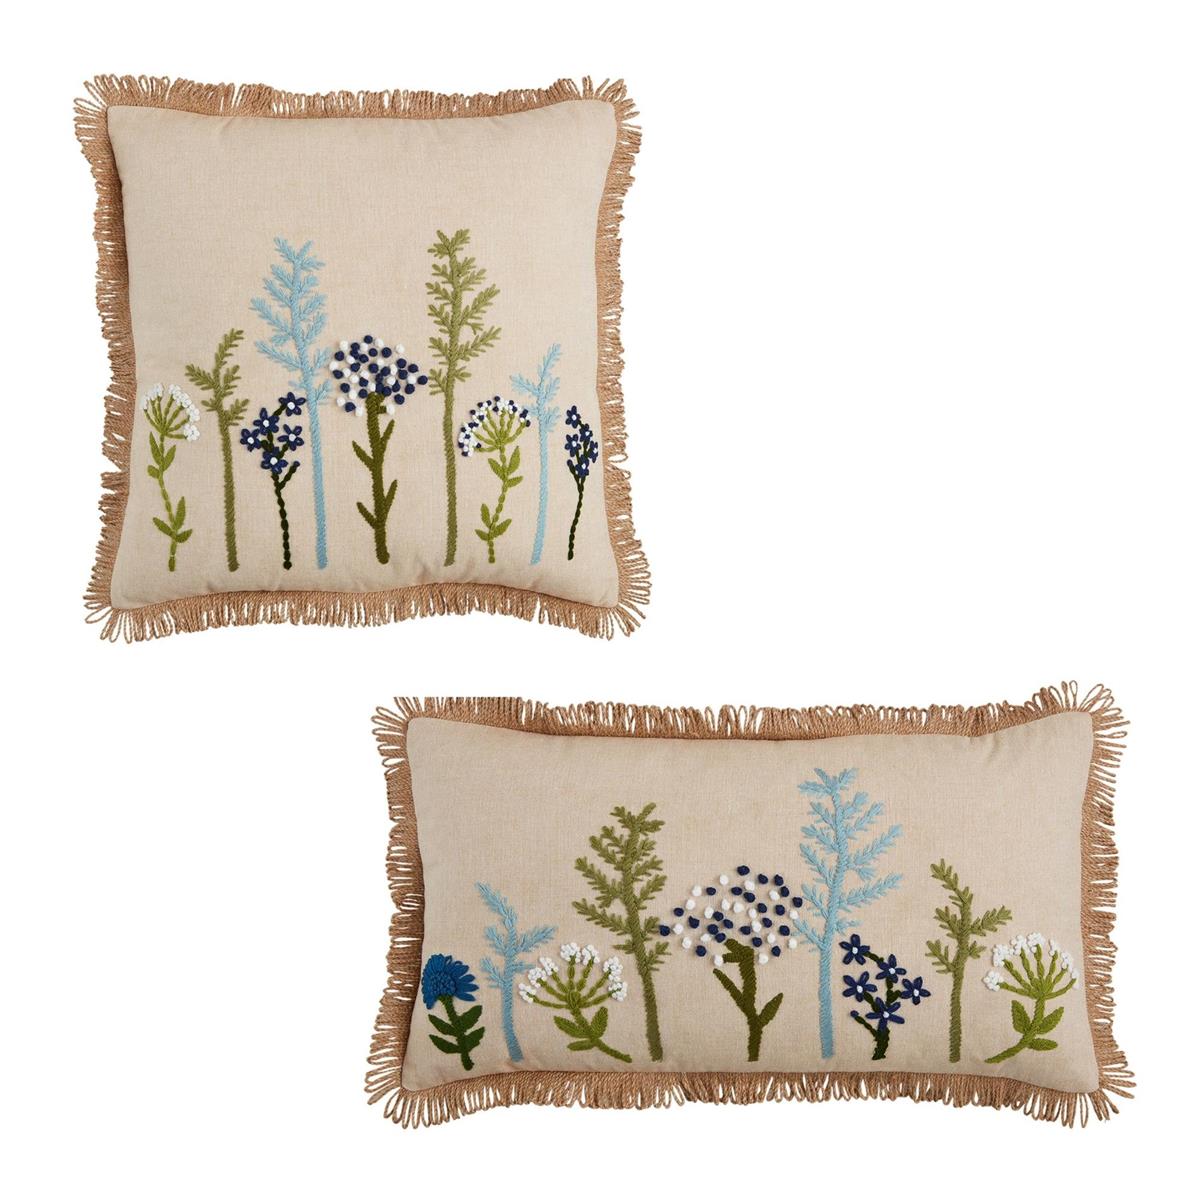 2 styles of blue floral pillows on a white background.